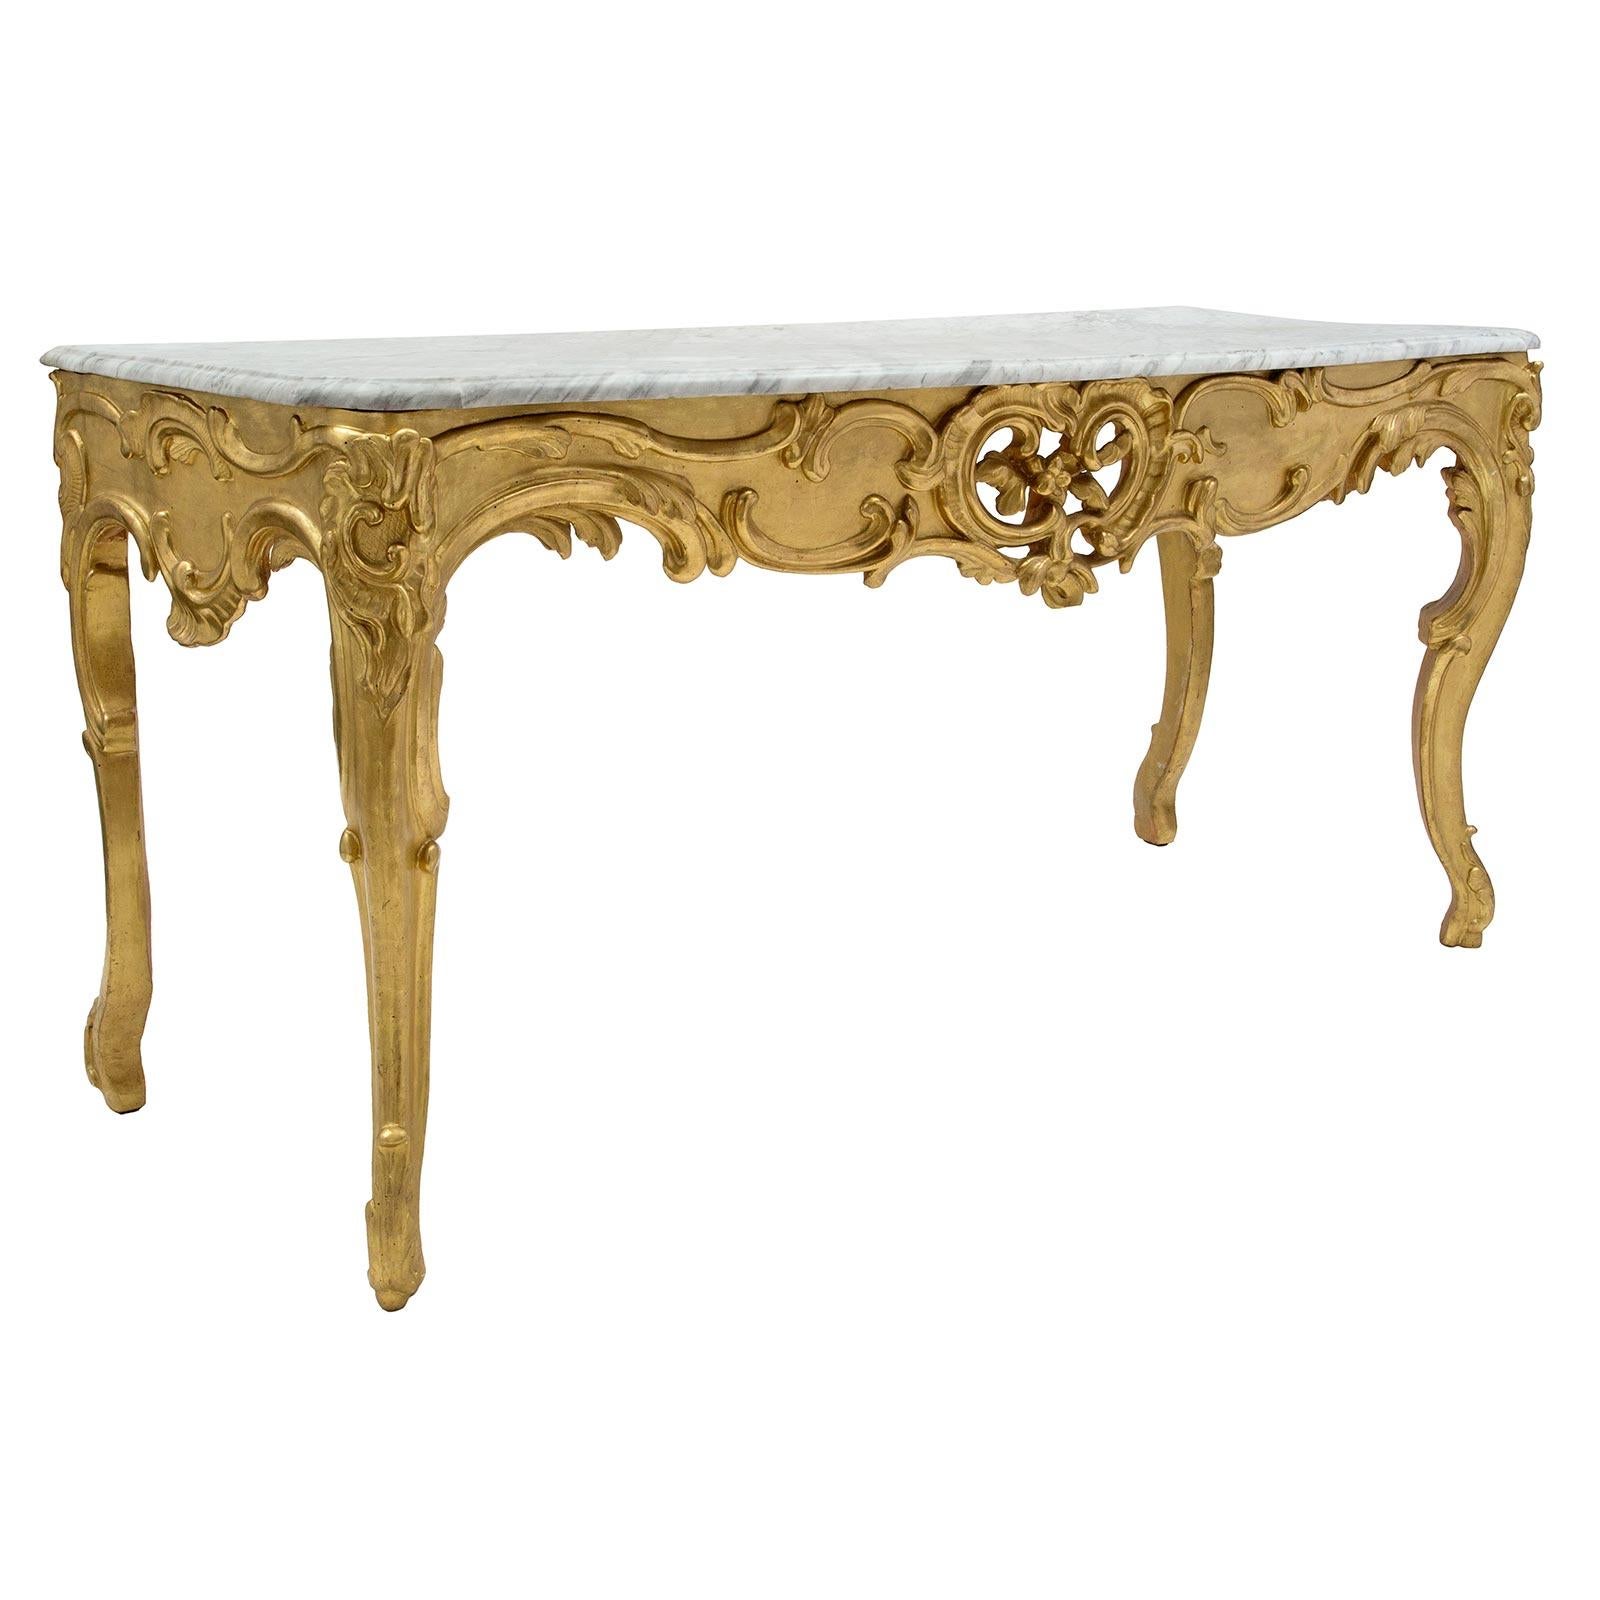 French 18th Century Régence Period Giltwood and Marble Console In Good Condition For Sale In West Palm Beach, FL